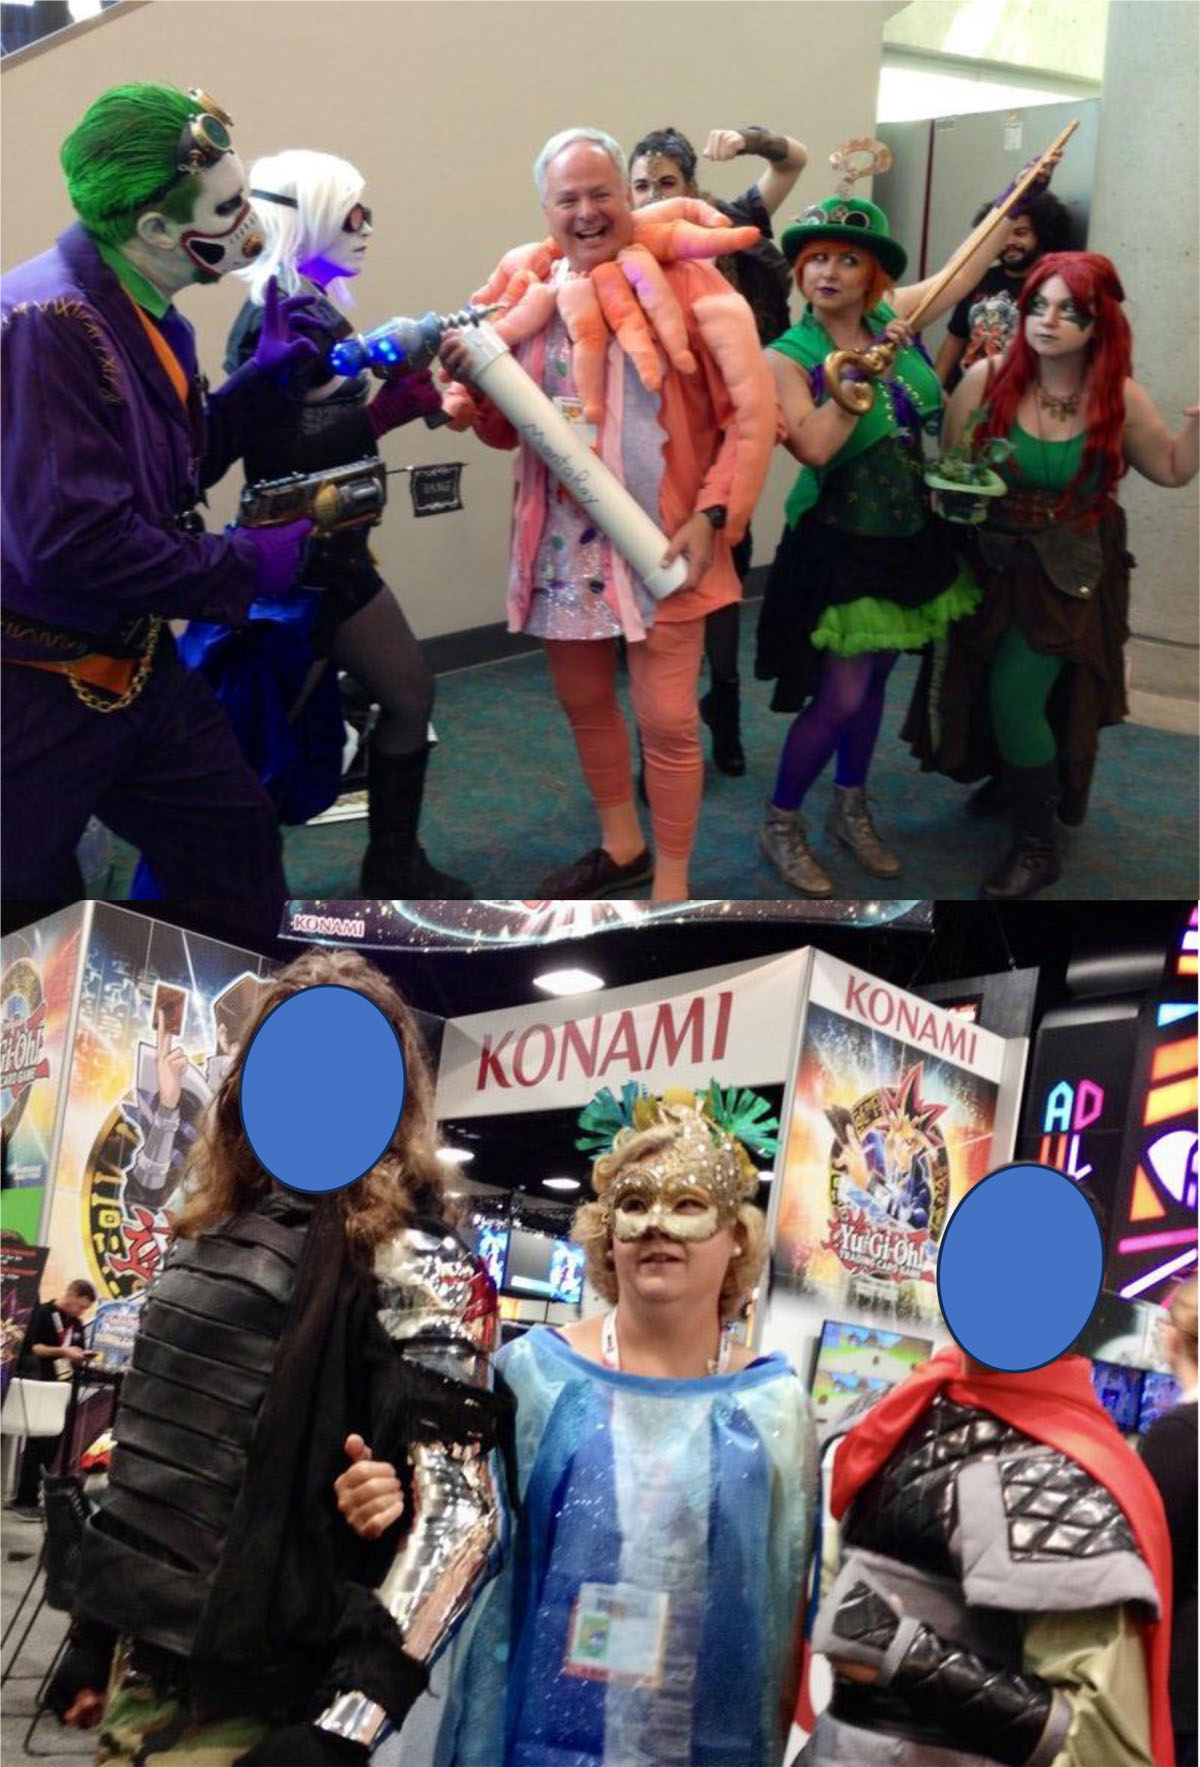 Top: Scientist in polyp costume being ‘attacked’ by other cosplayers; Bottom: Scientist in Amphitrite costume with cosplayers in Exhibit Hall